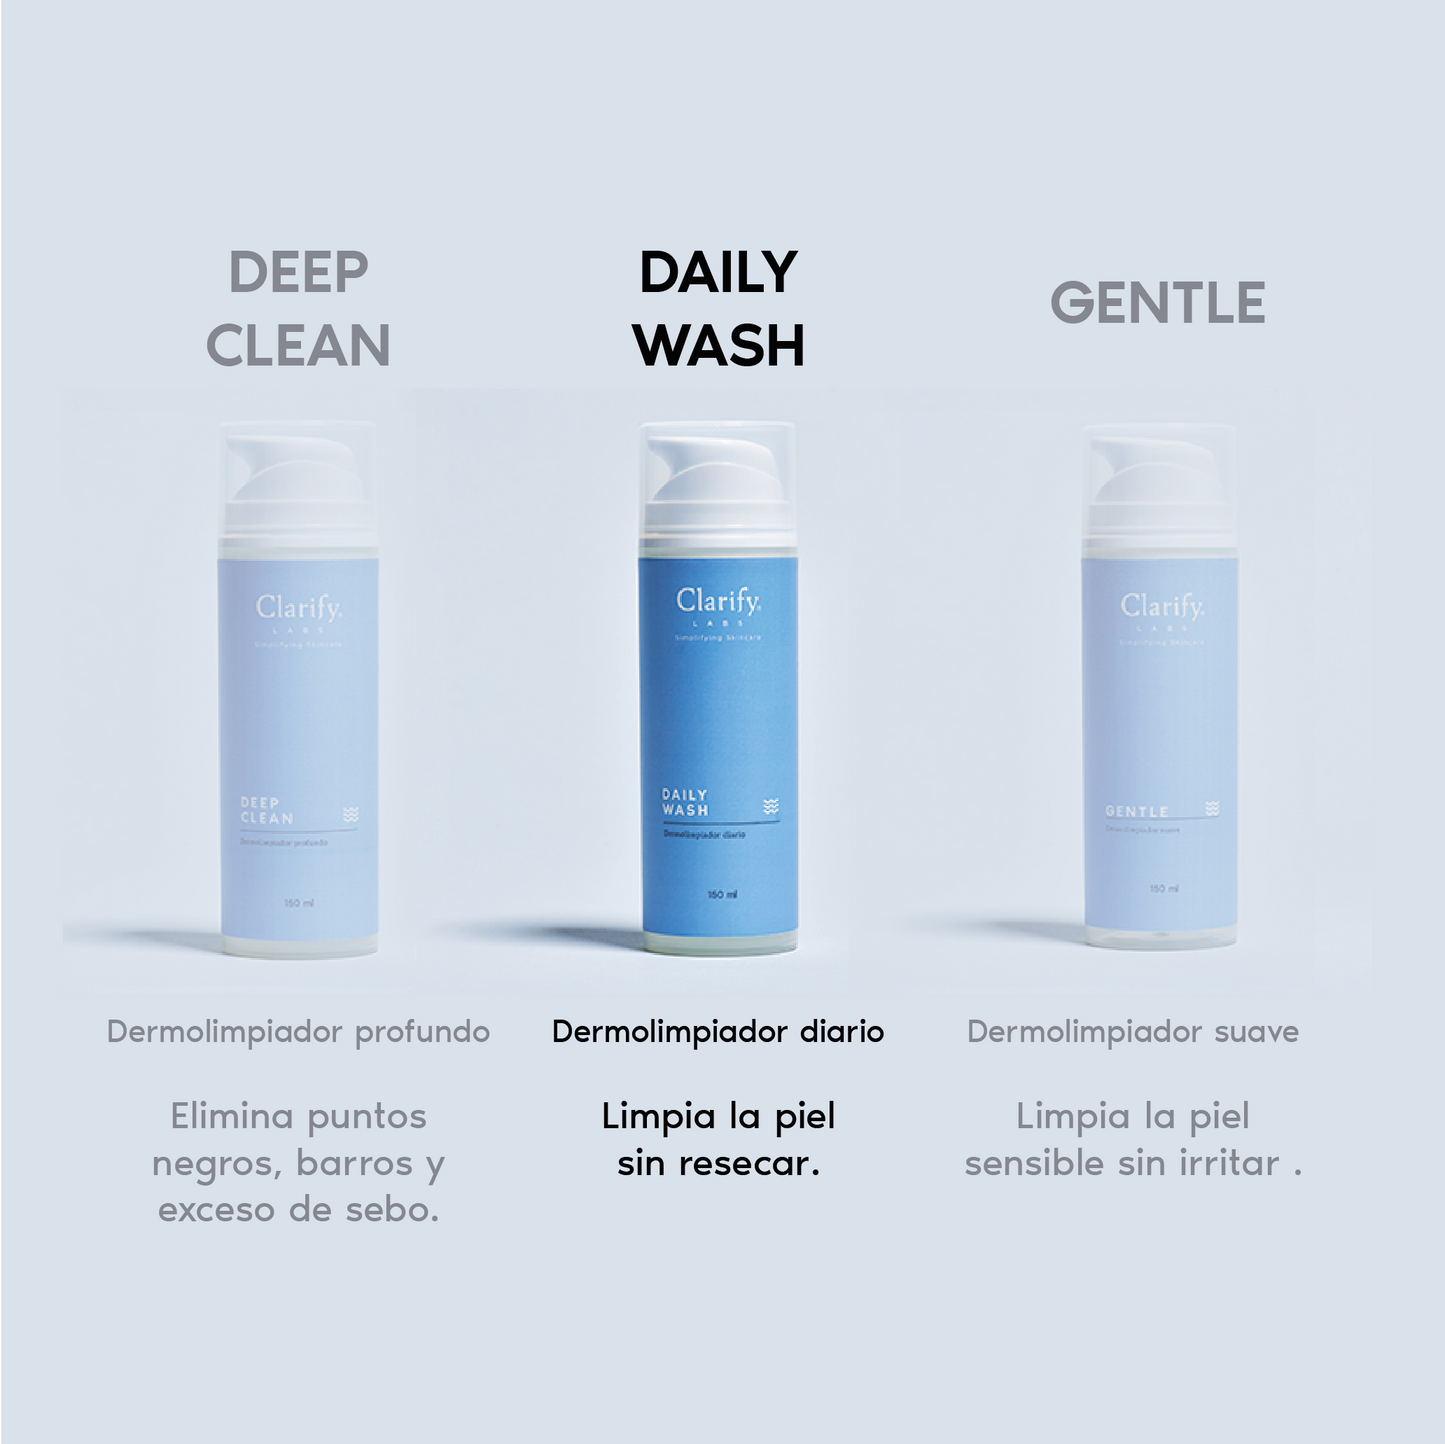 Daily Wash | Bio-cleanse